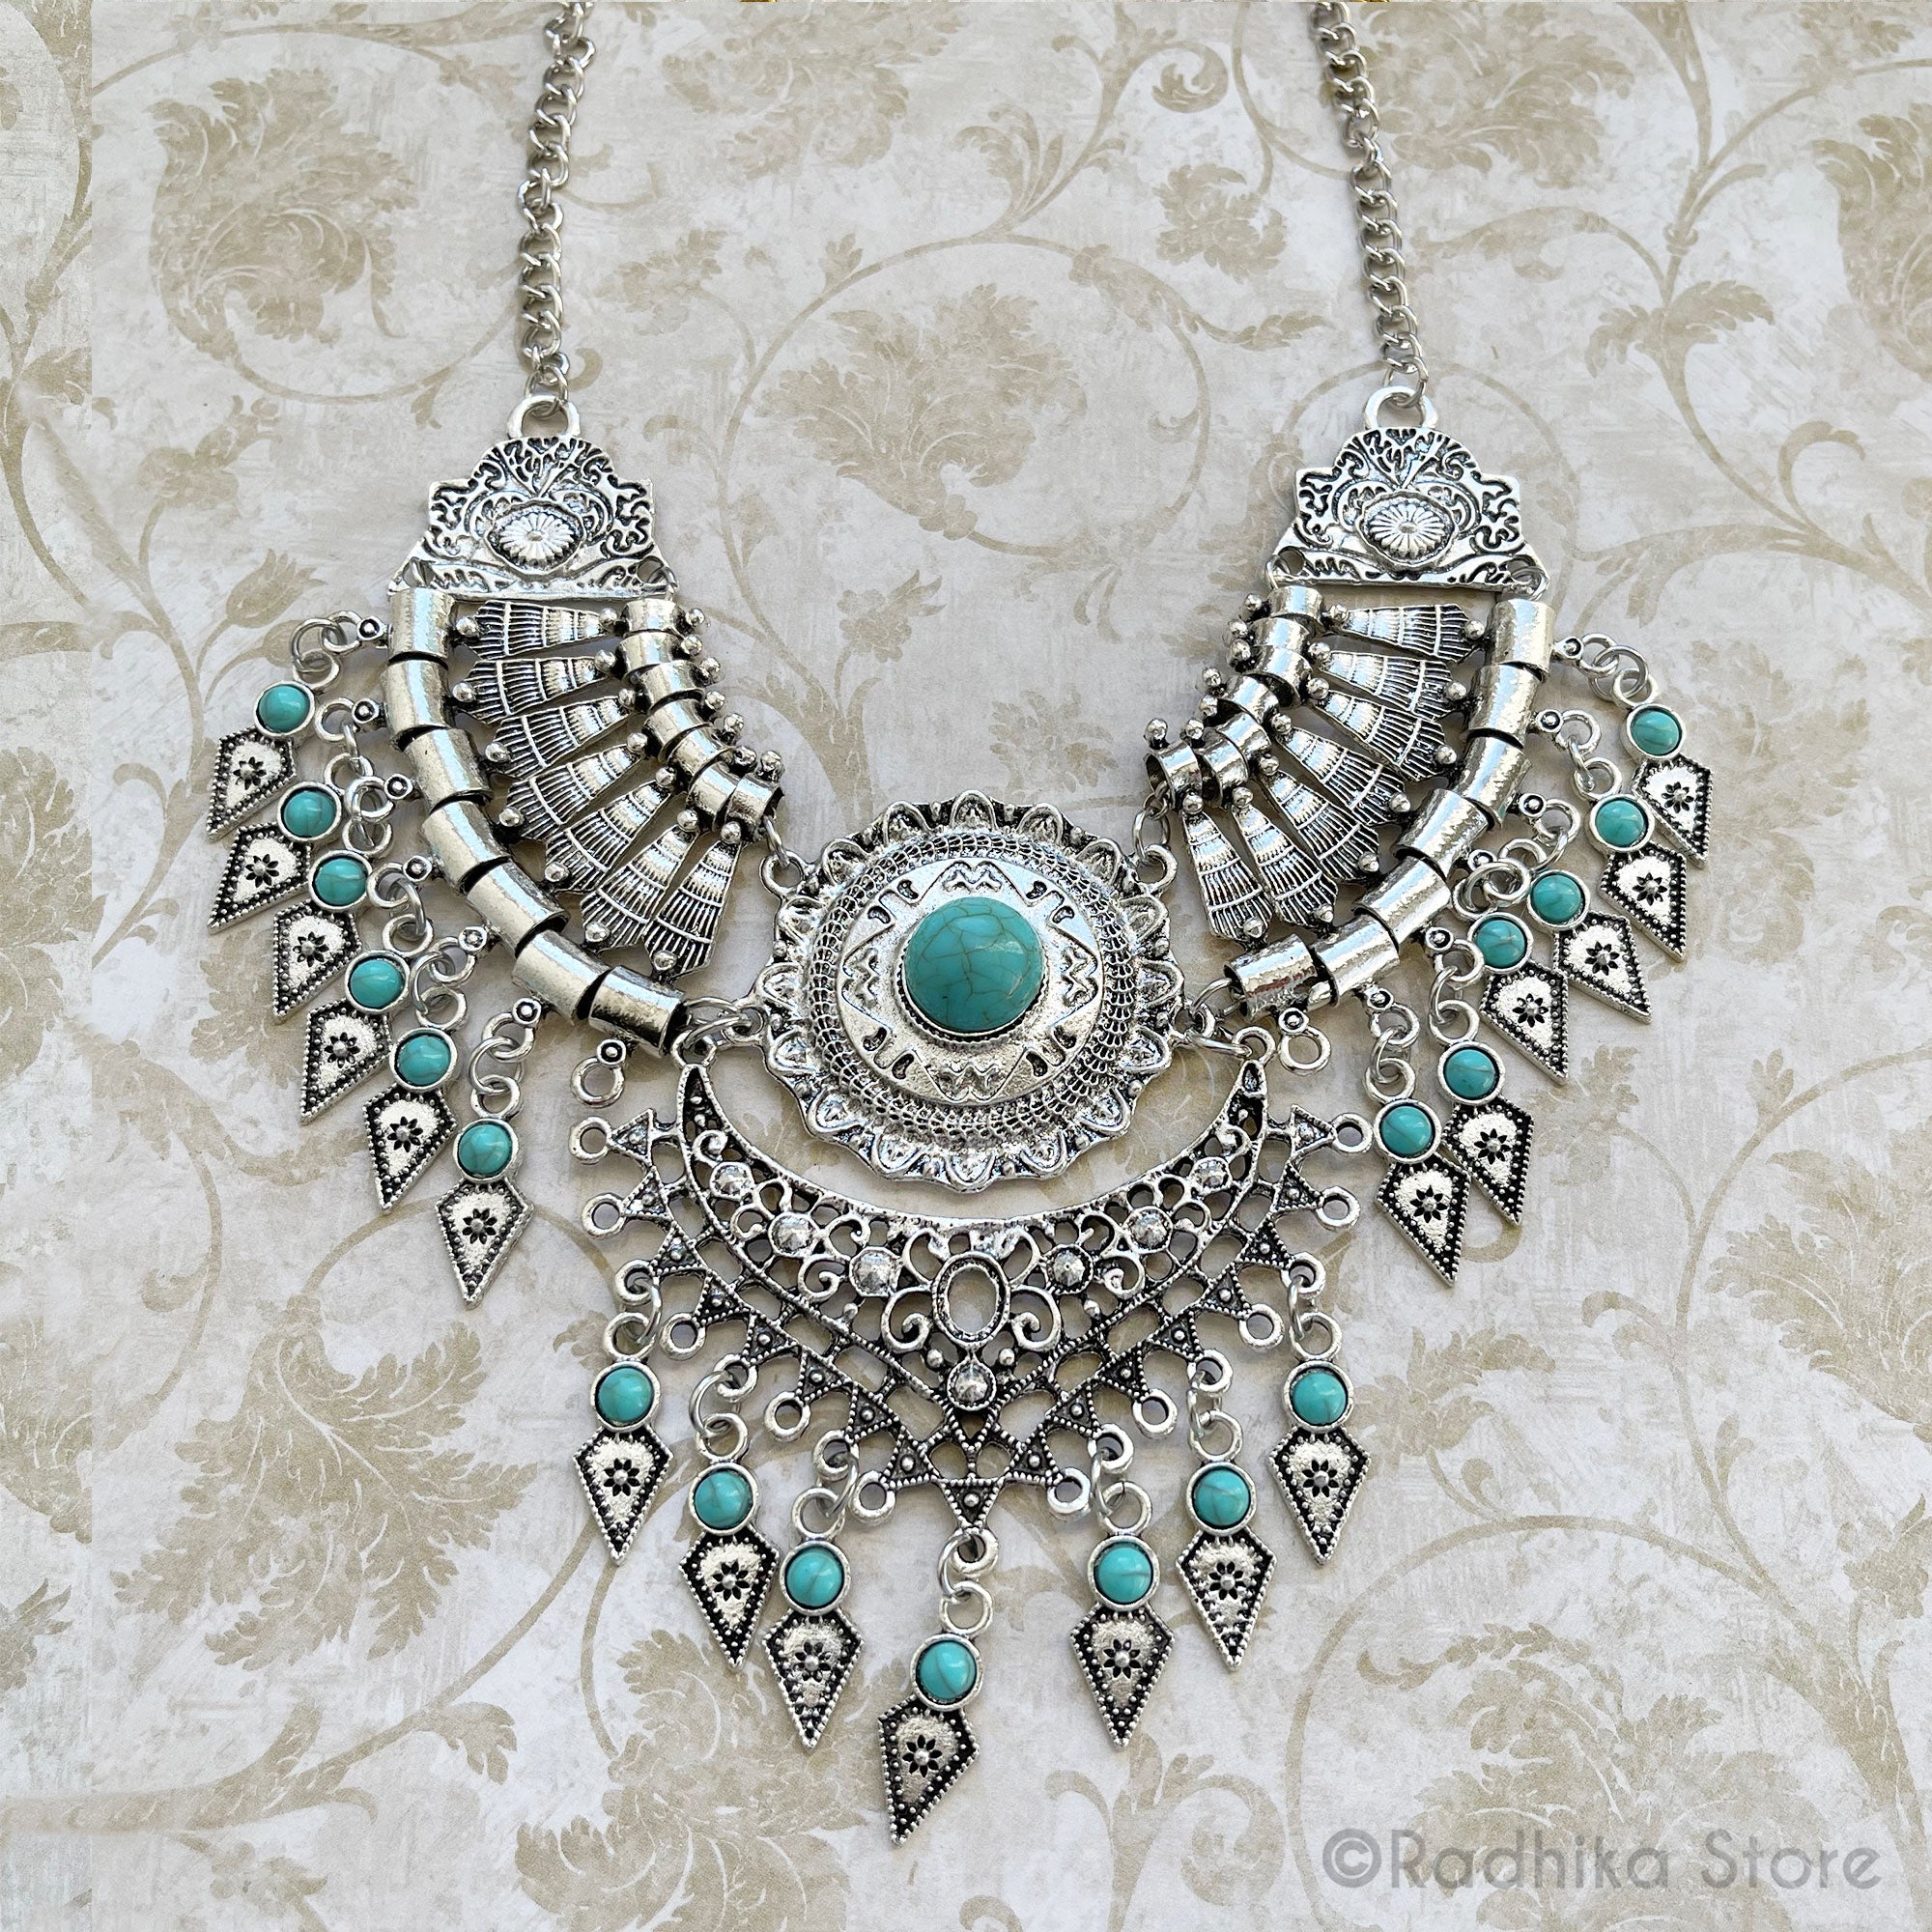 Gaurada Necklace/ Belt - Silver With Turquoise